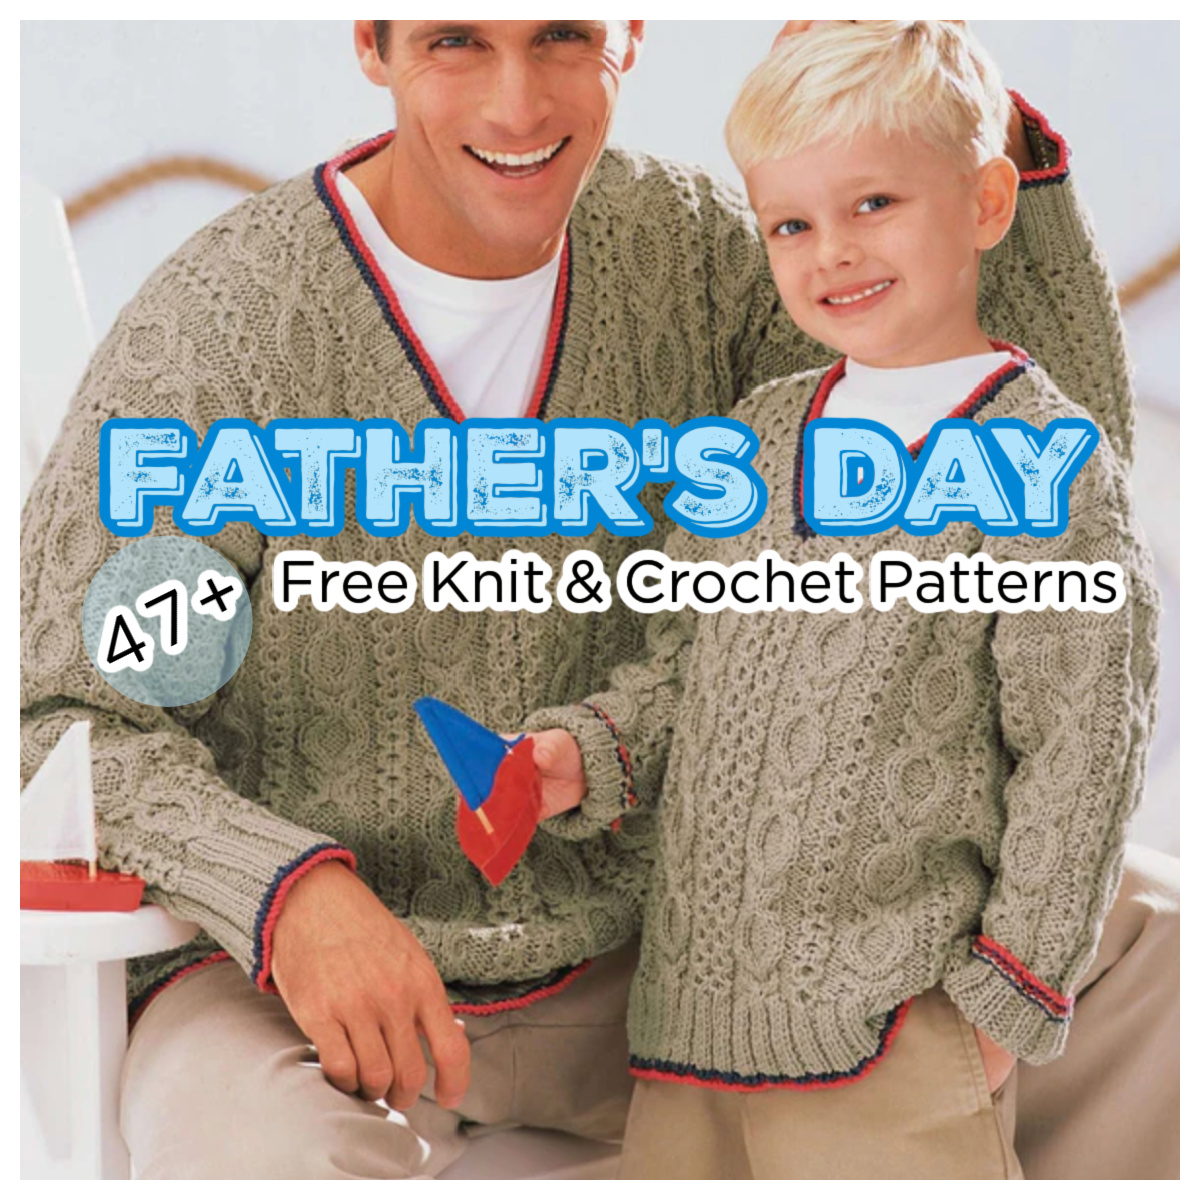 A man and a young boy, both smiling and wearing matching knitted sweaters, are pictured. Text overlay reads "Father's Day, 47+ Free Knit & Crochet Patterns." The image suggests a family-oriented crafting activity with free Father's Day projects. -Marly Bird